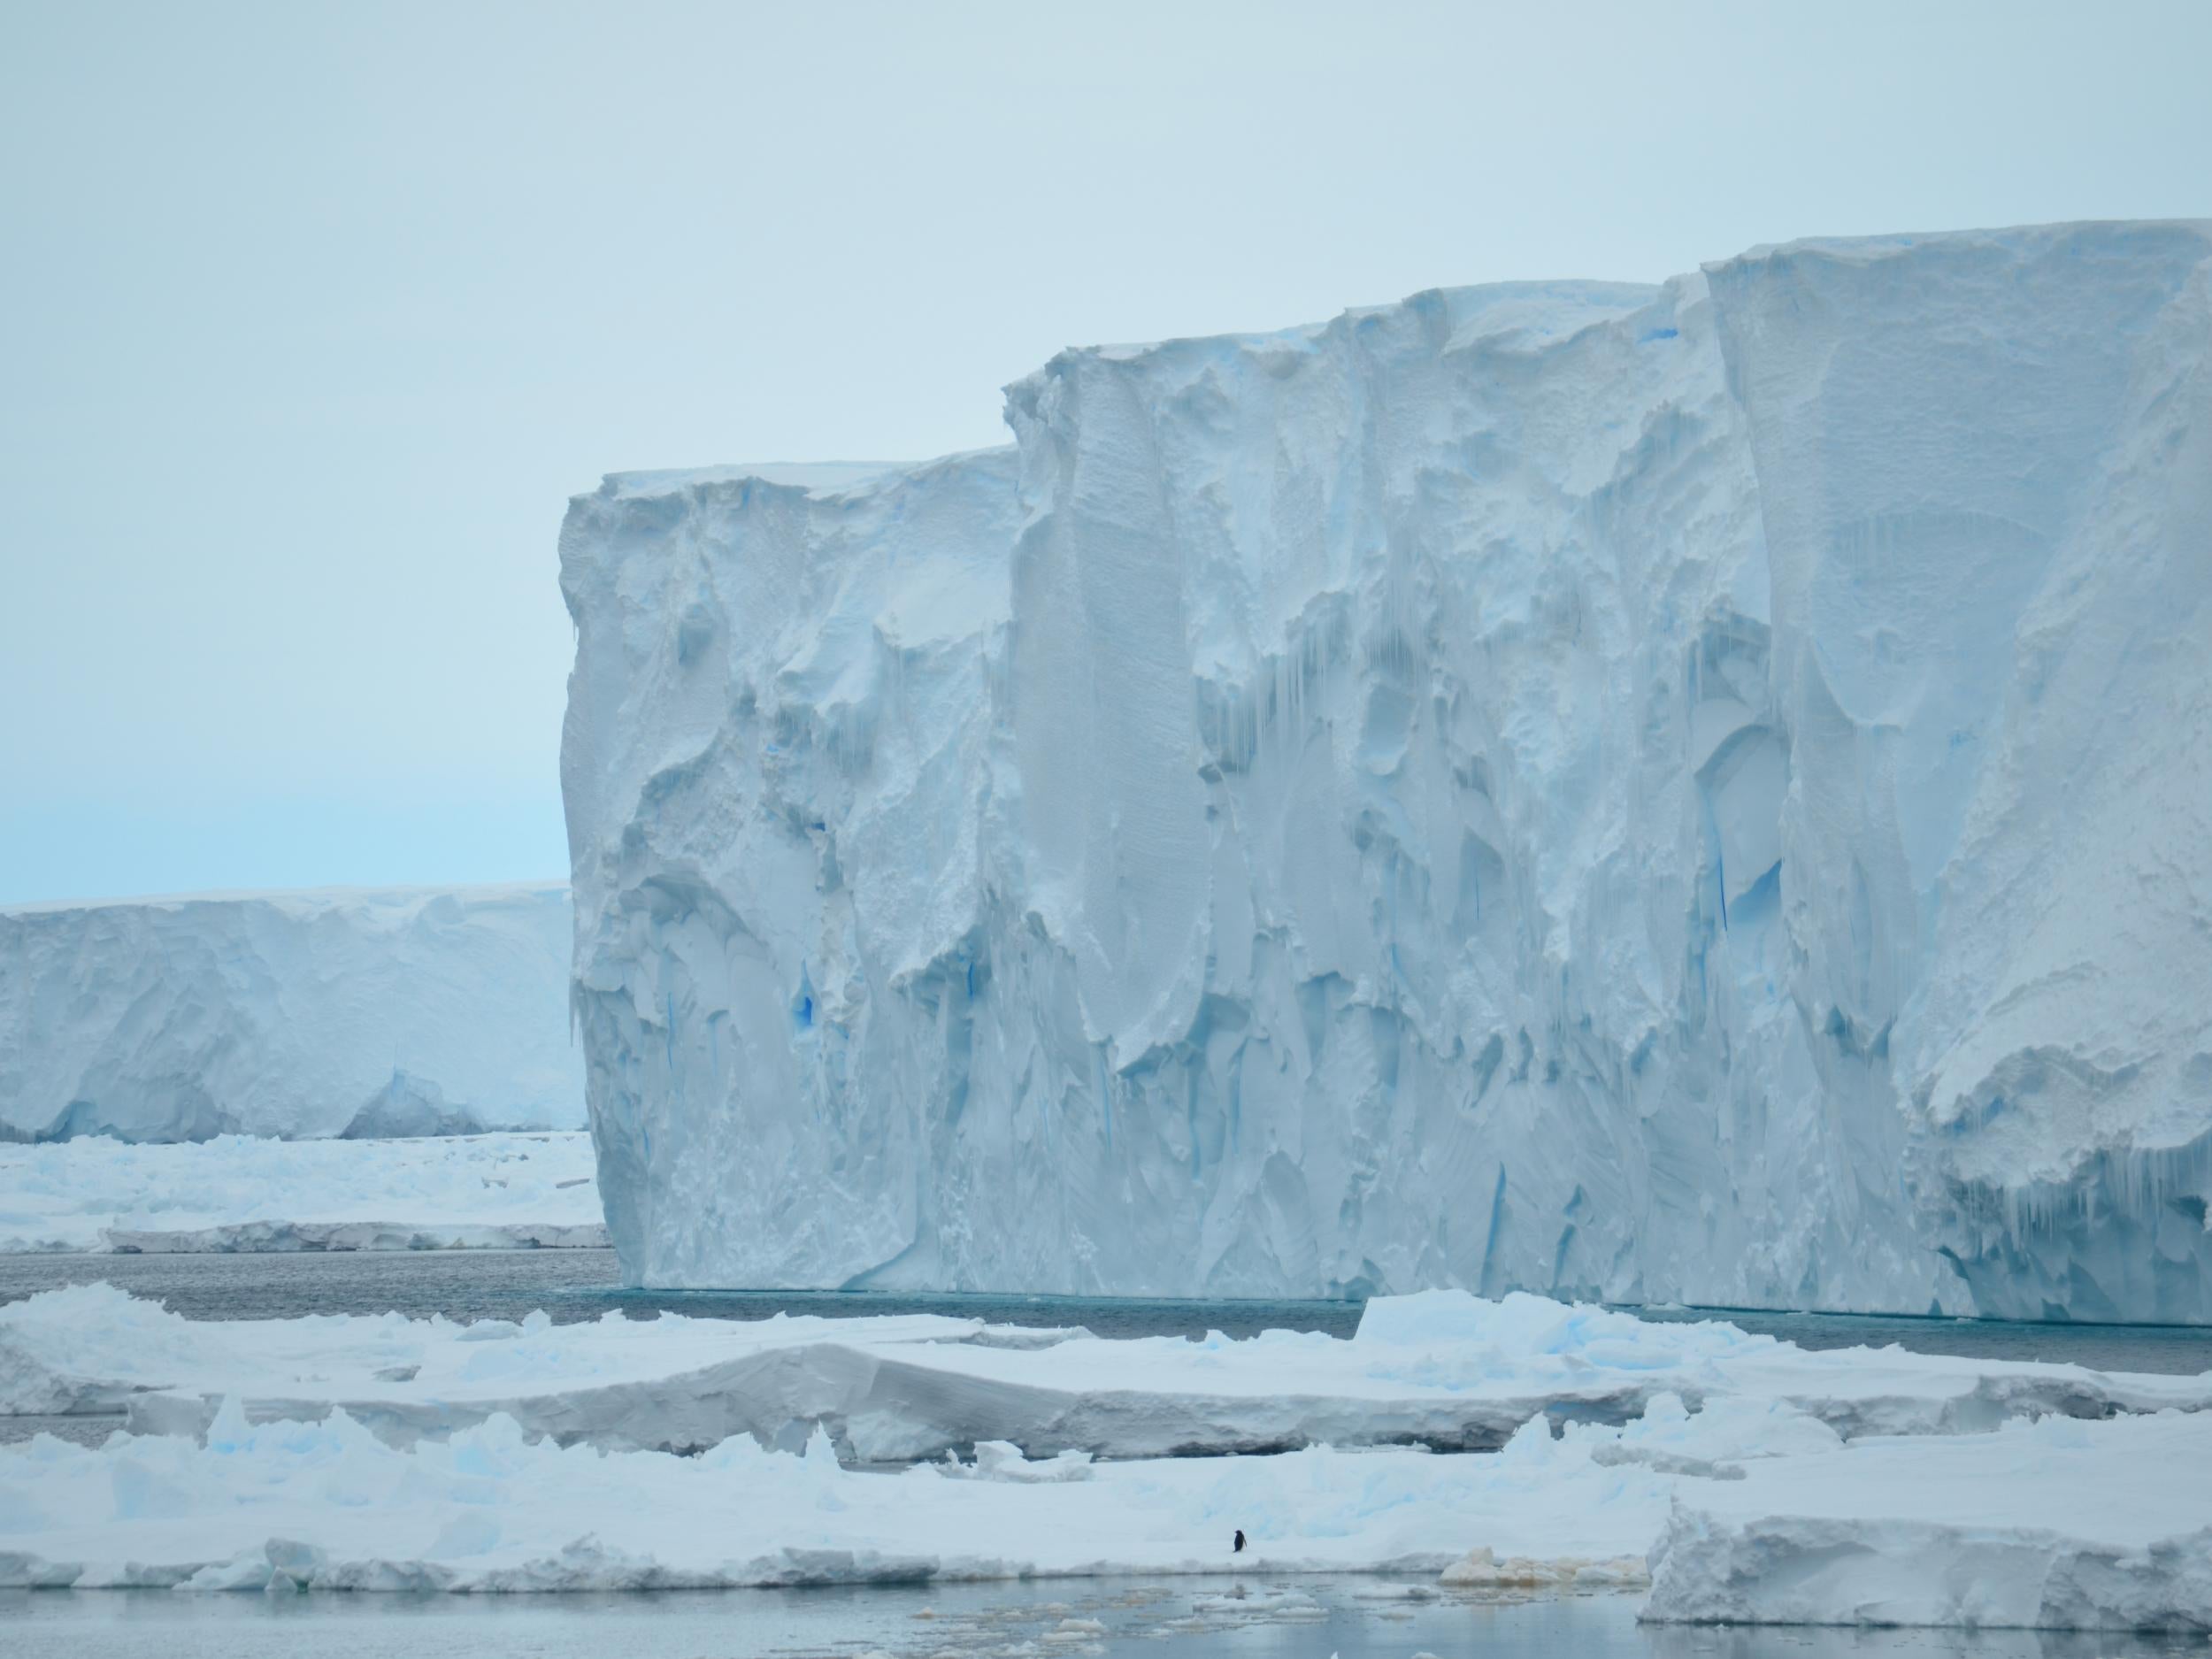 The Mertz glacier in East Antarctica is one of the many areas that could be melting faster as warm water trapped underneath it accelerates the process